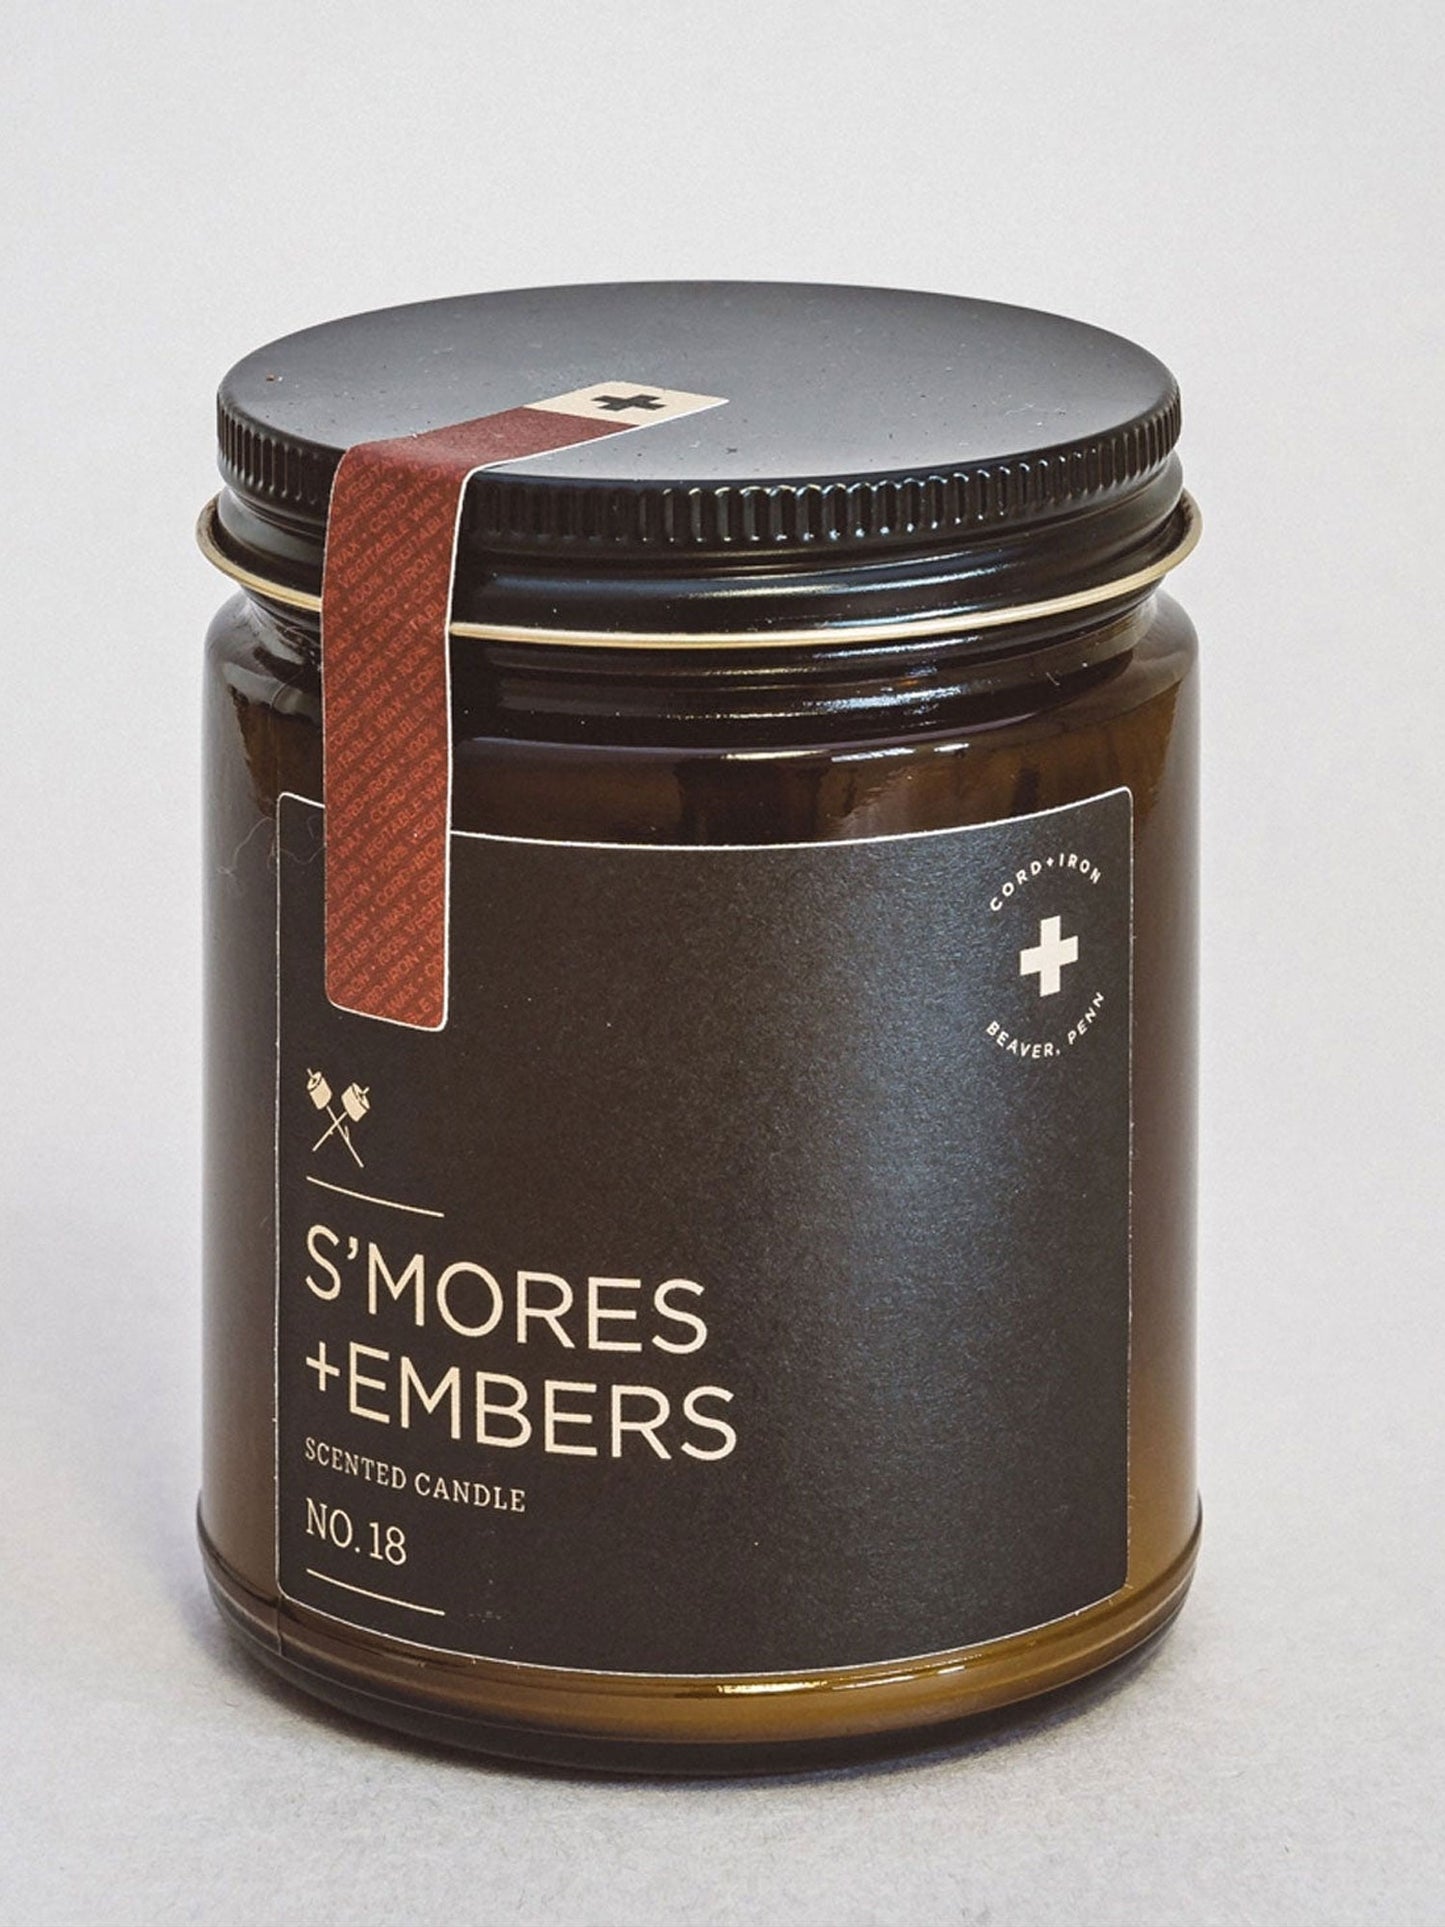 Cord and Iron SMores Embers Soy Candle Amber Jar